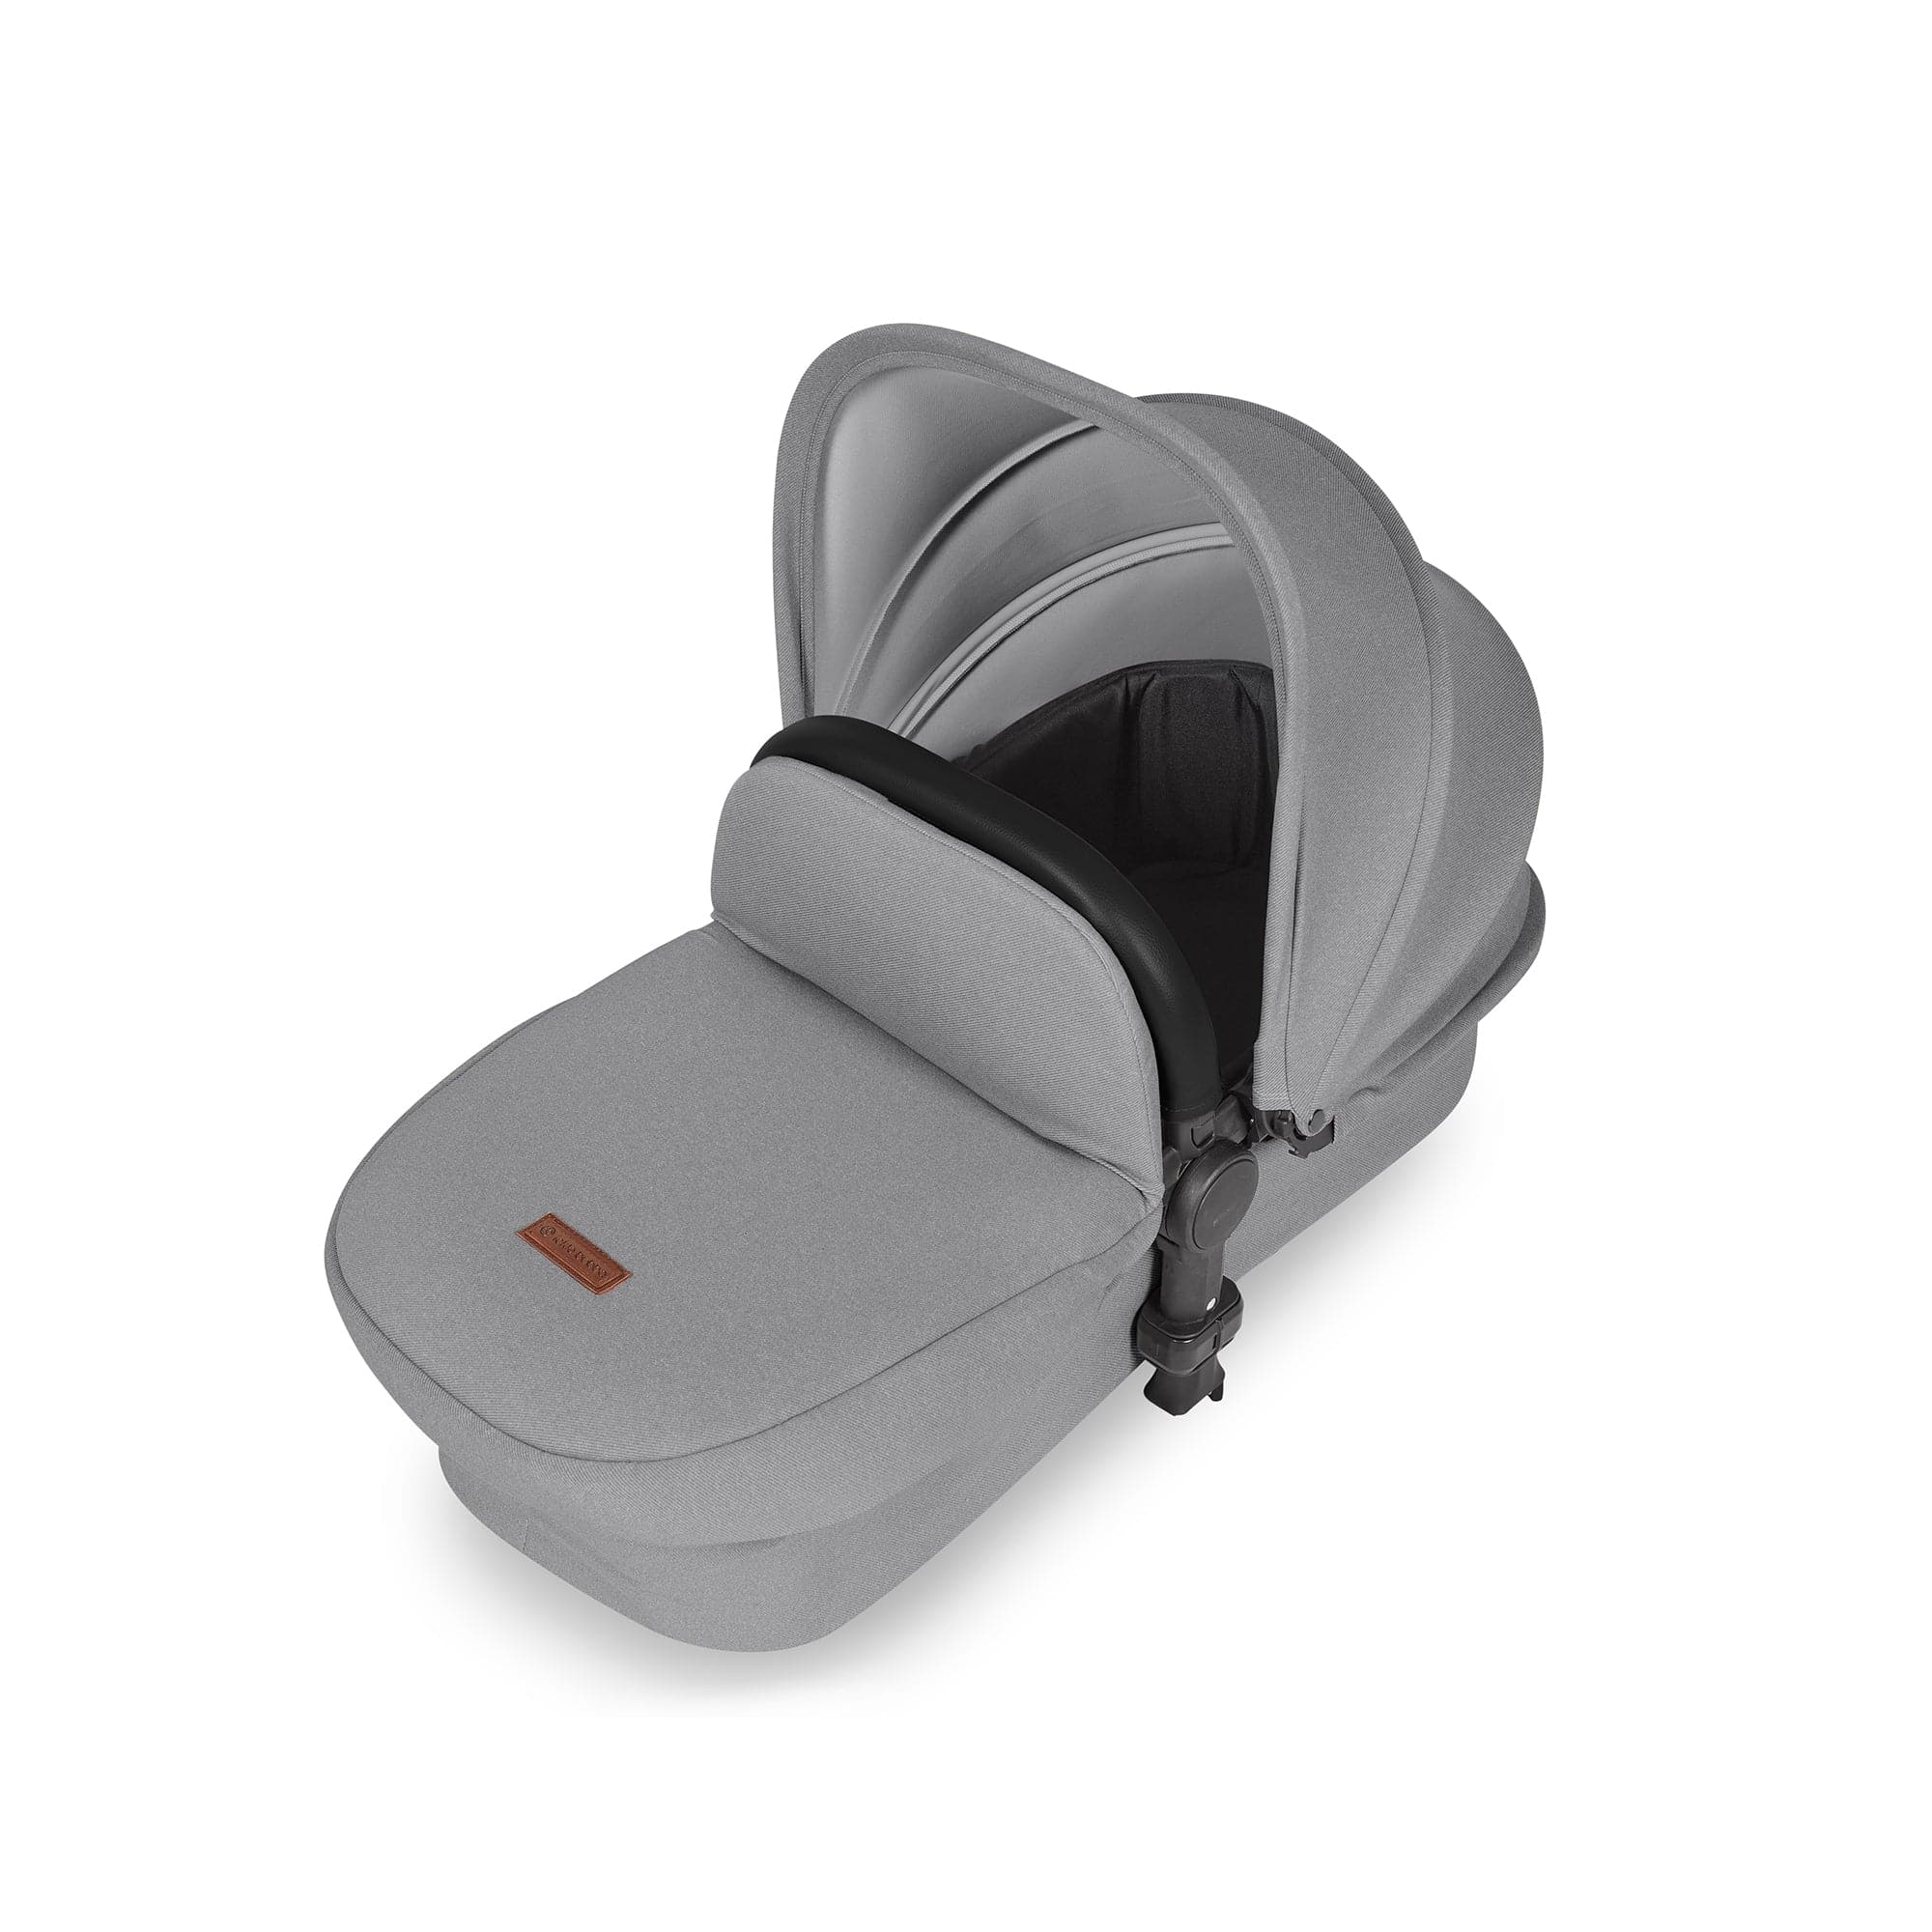 Ickle Bubba Stomp Luxe All-In-One I-Size Travel System With Isofix Base - Silver / Pearl Grey / Black - For Your Little One